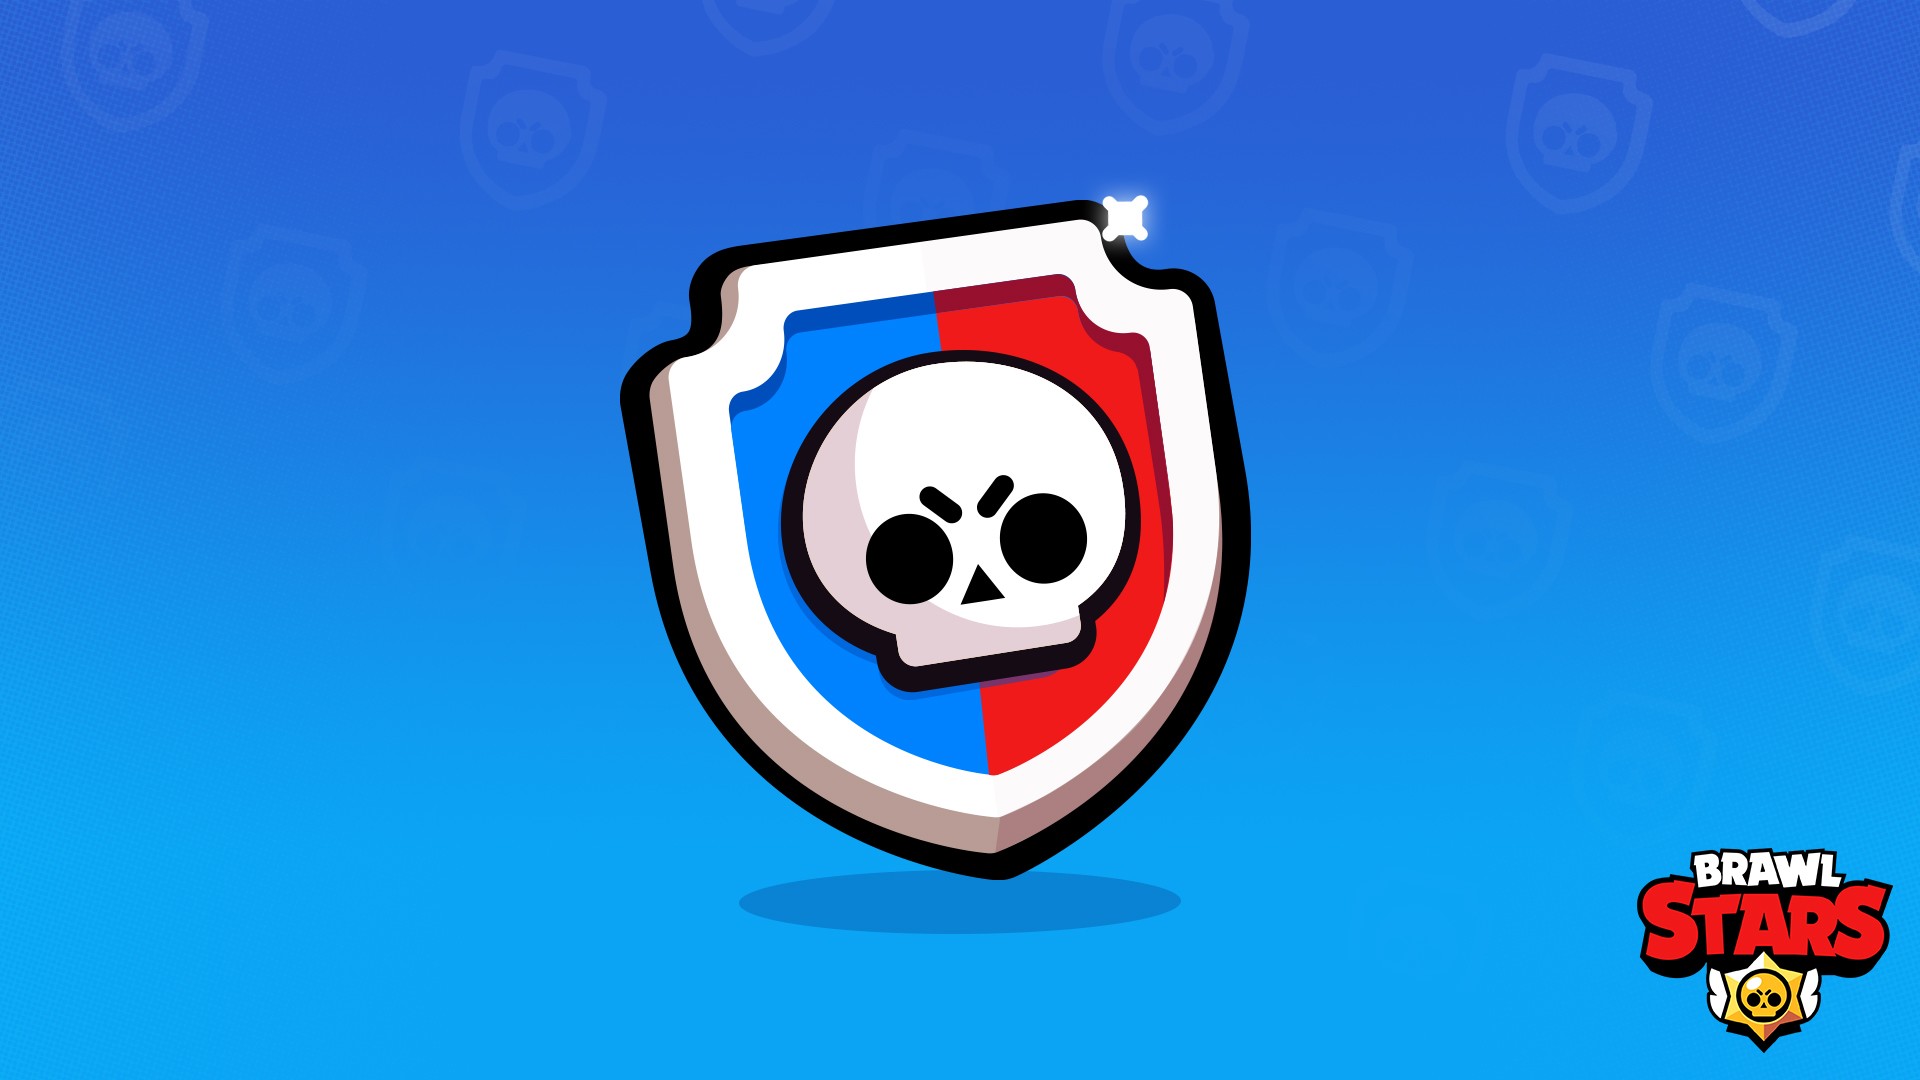 What You Need To Know About The Power League In Brawl Stars Dot Esports - brawl stars icon of game